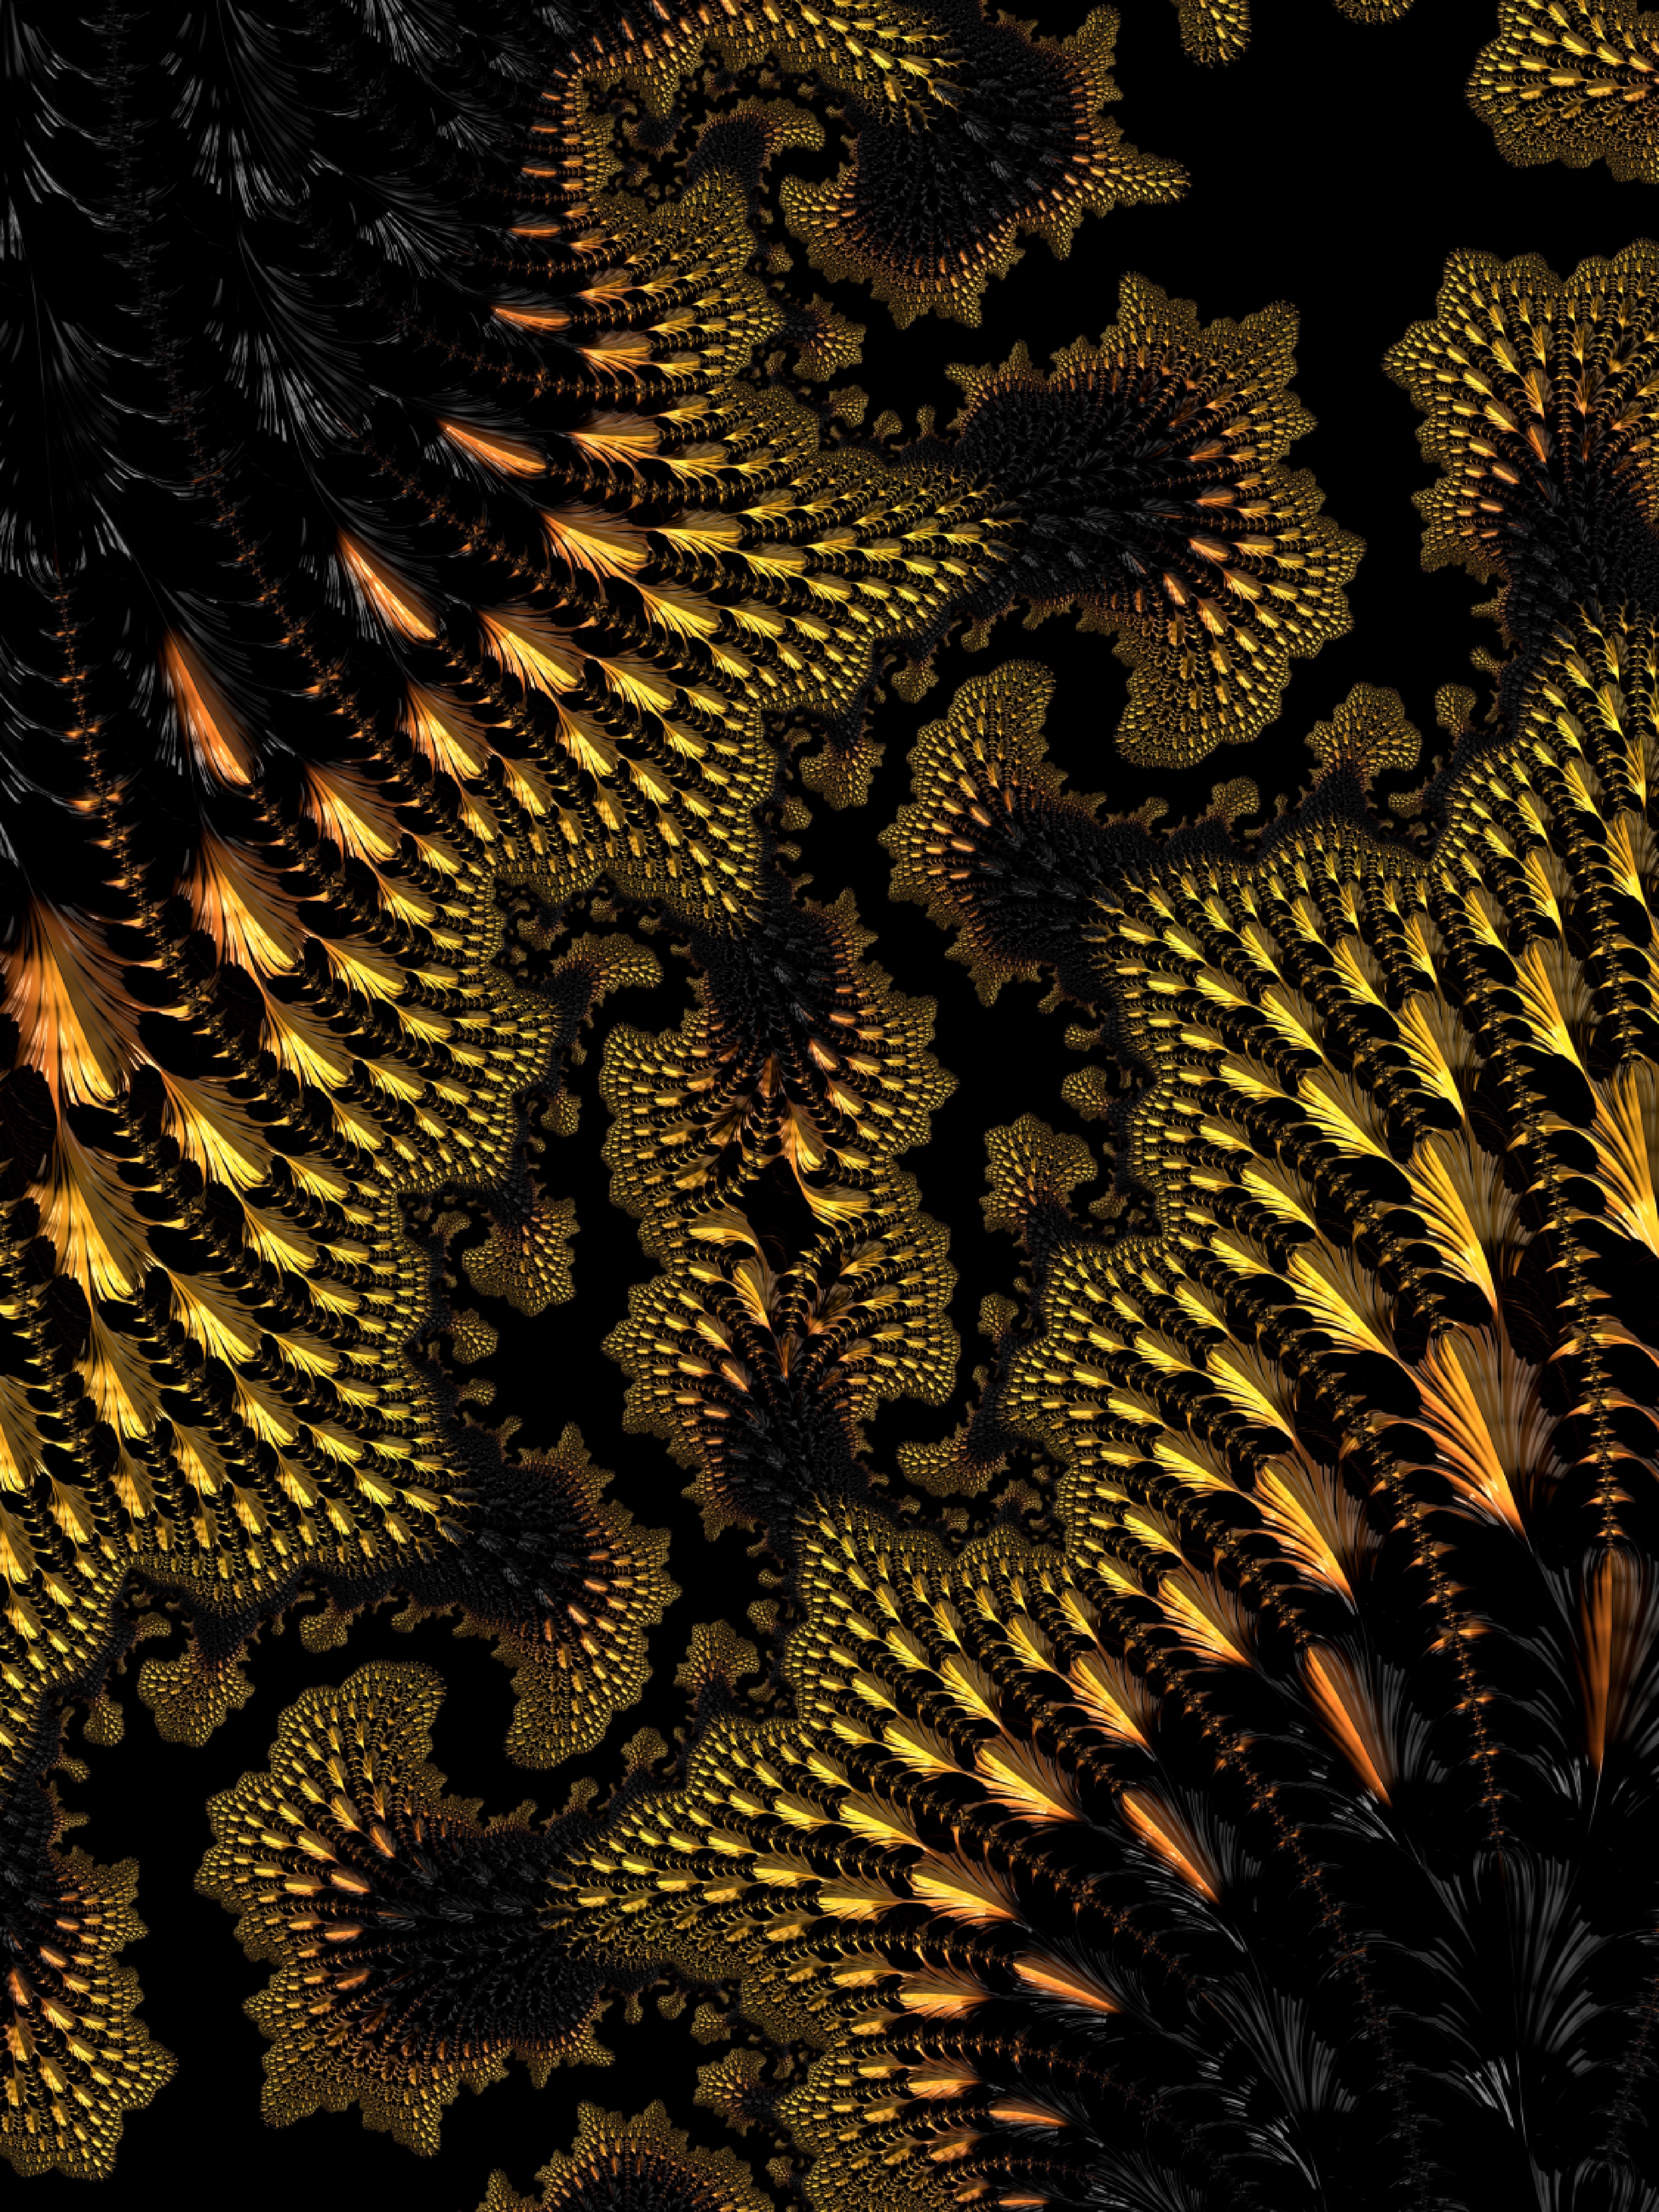 black, fractal, ornate, 3d, abstract, yellow, winding, sinuous